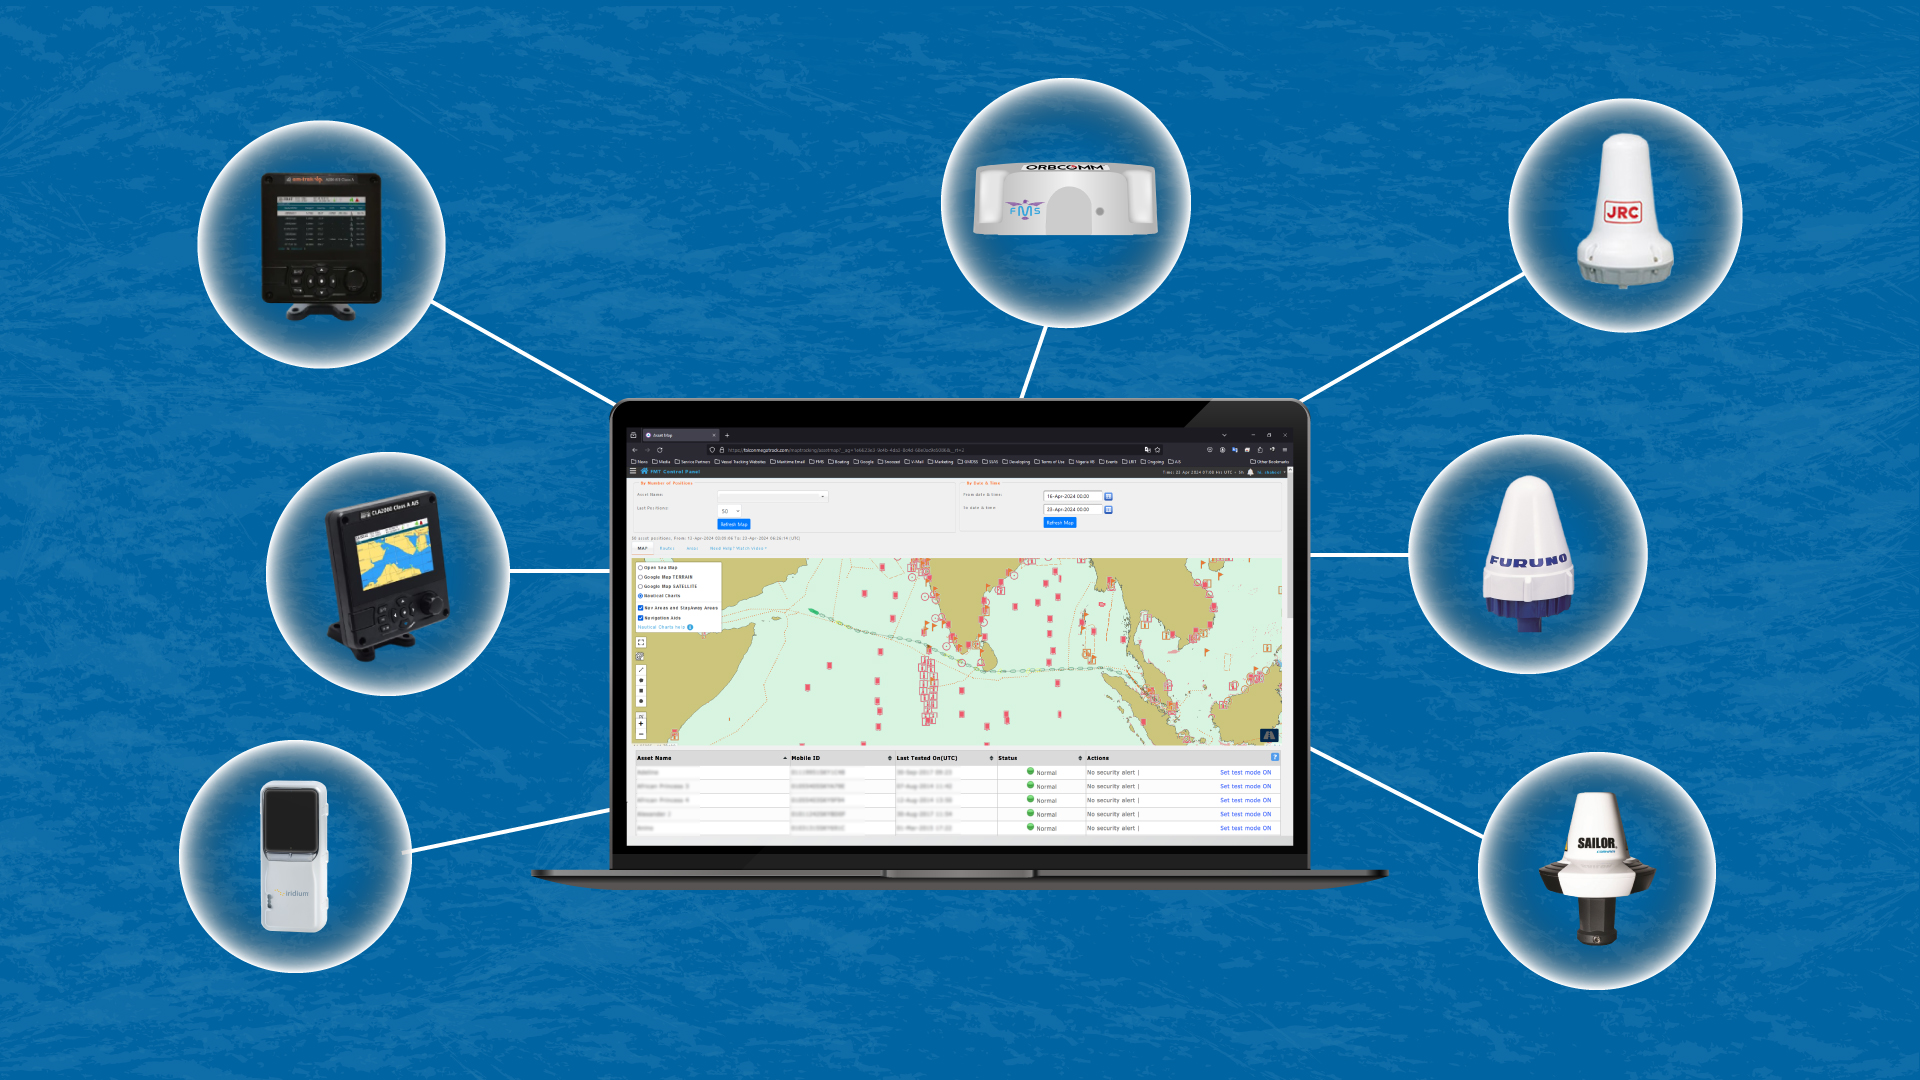 Access Anytime, Anywhere: Access Electronic Nautical Charts through various devices, including Inmarsat-C, AIS, Iridium Solar Edge, and FMT Hardware. • Furuno SSAS – Felcom 12, Felcom 15, Felcom 16, Felcom 18 and higher models; • JRC SSAS – JUE-75C, JUE-85C; JUE-95C, JUE-95SA; • Cobham – SAILOR TT 3000 Series, SAILOR 6000 Series mini-C SSAS; • A100, A200 AIS Class A (em-trak) • FA-170 AIS Class A (Furuno) • JHS-183 AIS Class A (JRC) • SAILOR 6280, 6281 Ship AIS Class-A (Cobham) • Iridium Solar Edge • FMT-MAT-V1, FMT-SSAS-V1 (Falcon Mega Solutions)